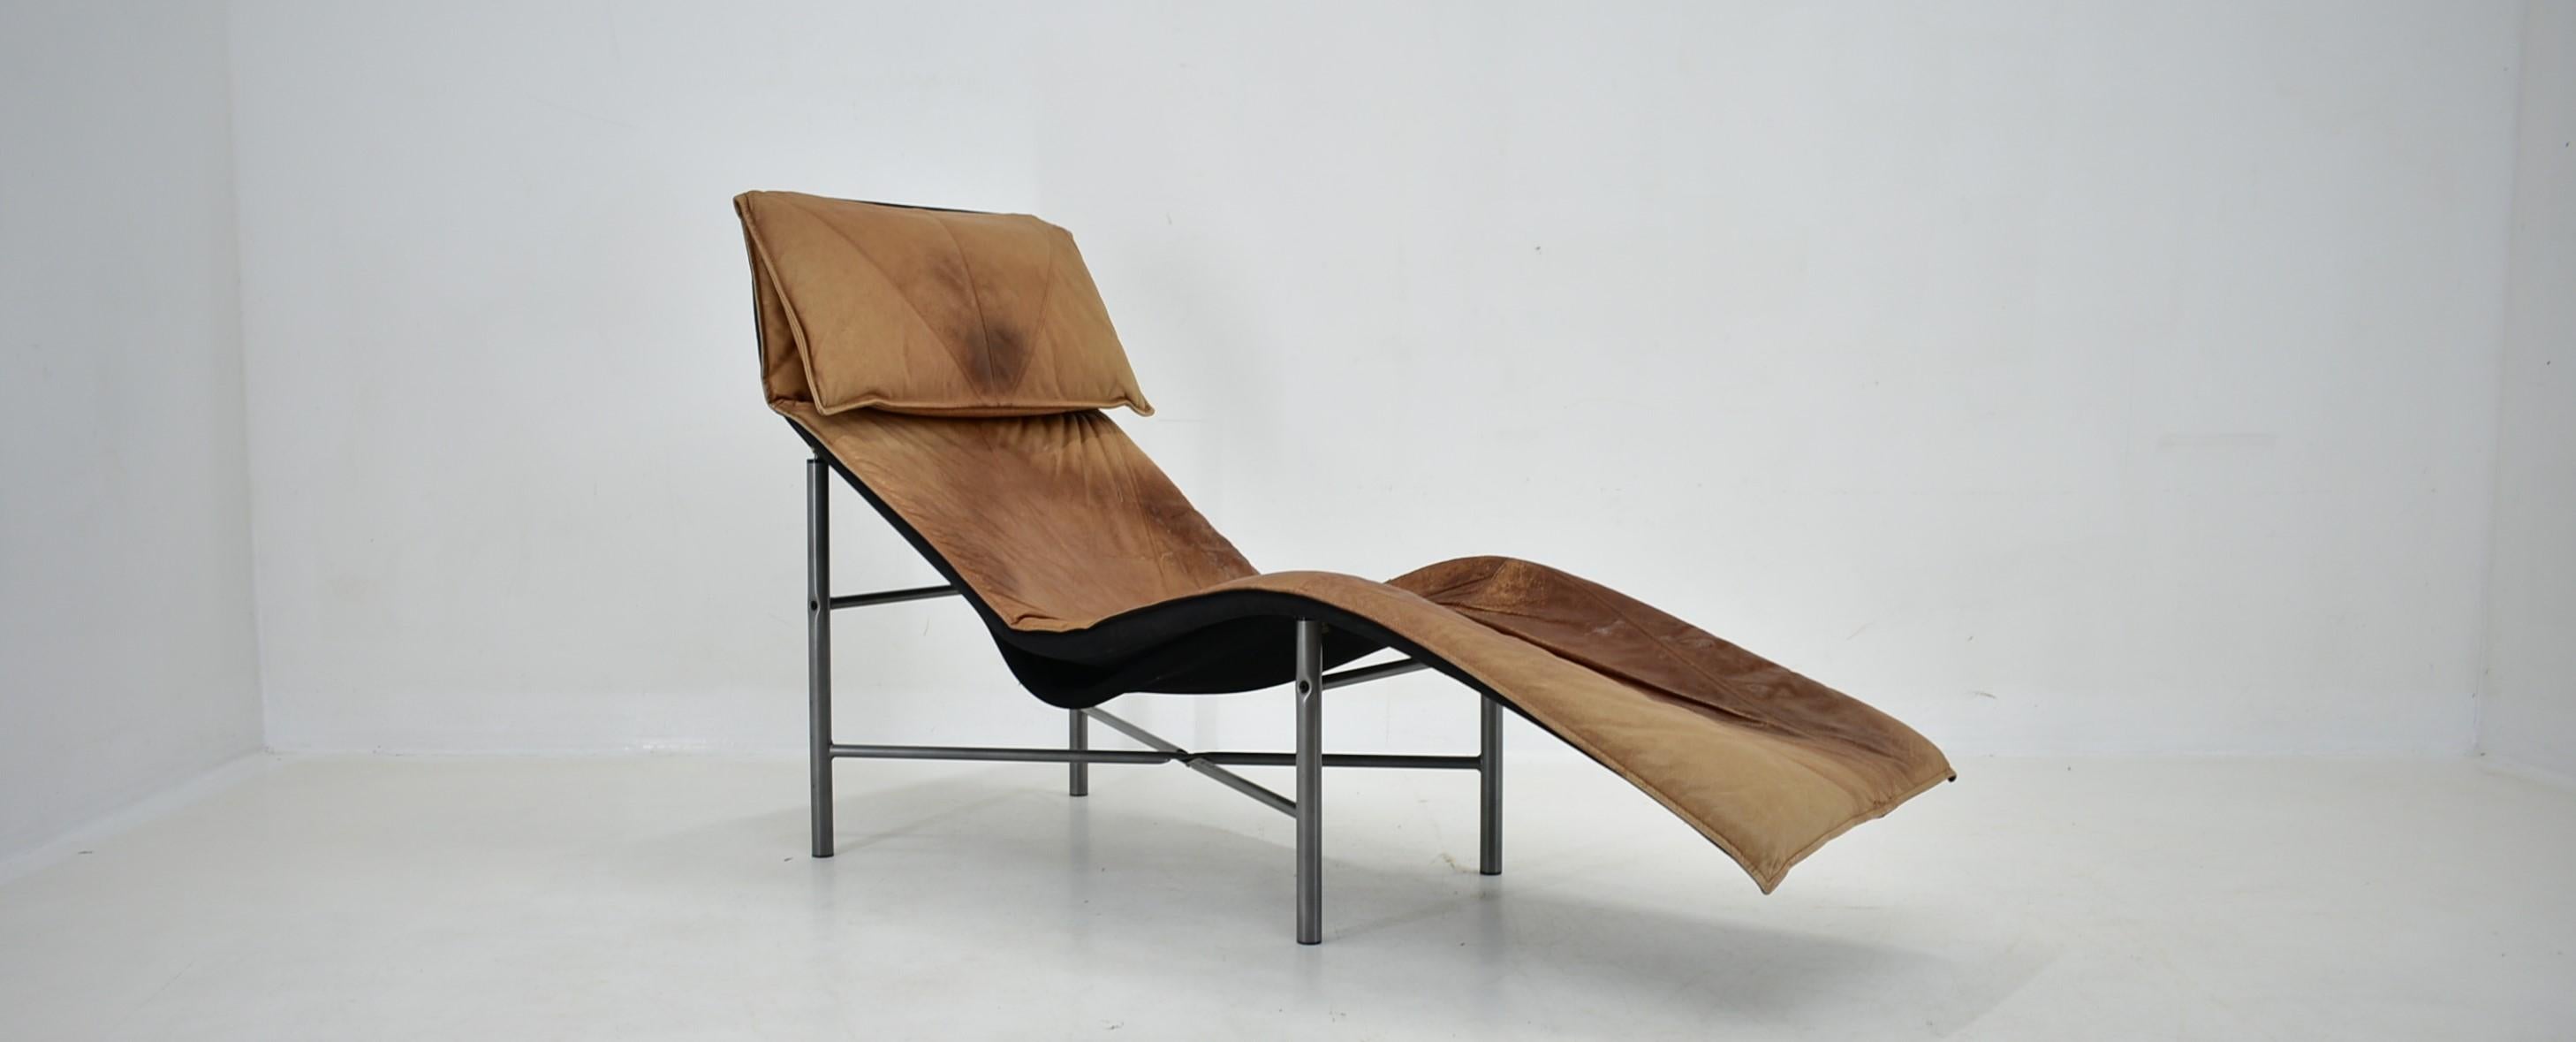 This vintage chaise lounge by Tord Bjorklund, 1970 Sweden, combines comfort and timeless design.
The upholstery of the chaise lounge was covered with cognac leather and shows a great leather patina.
Also the base was made of grey lacquered tube